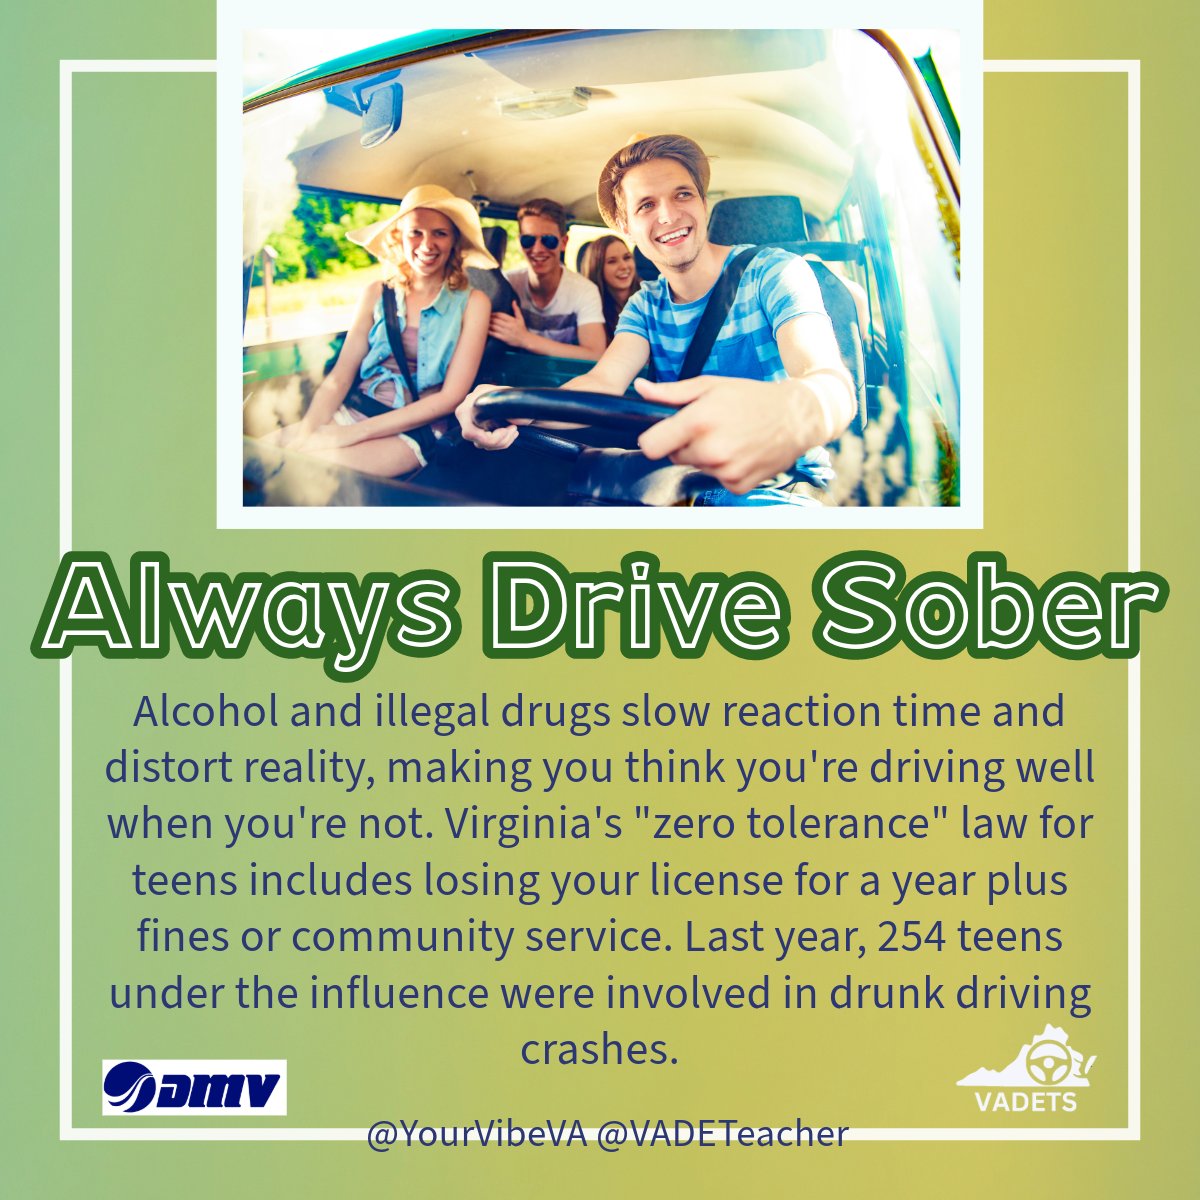 Always Drive Sober!
Va's zero-tolerance law for teens includes losing your license for a year plus fines or community service. Last year, 254 teens under the influence were involved in drunk driving crashes. SAY NO TO UNDERAGE DRINKING & DRIVE SOBER!
#MySpringVibe #ArriveAlive